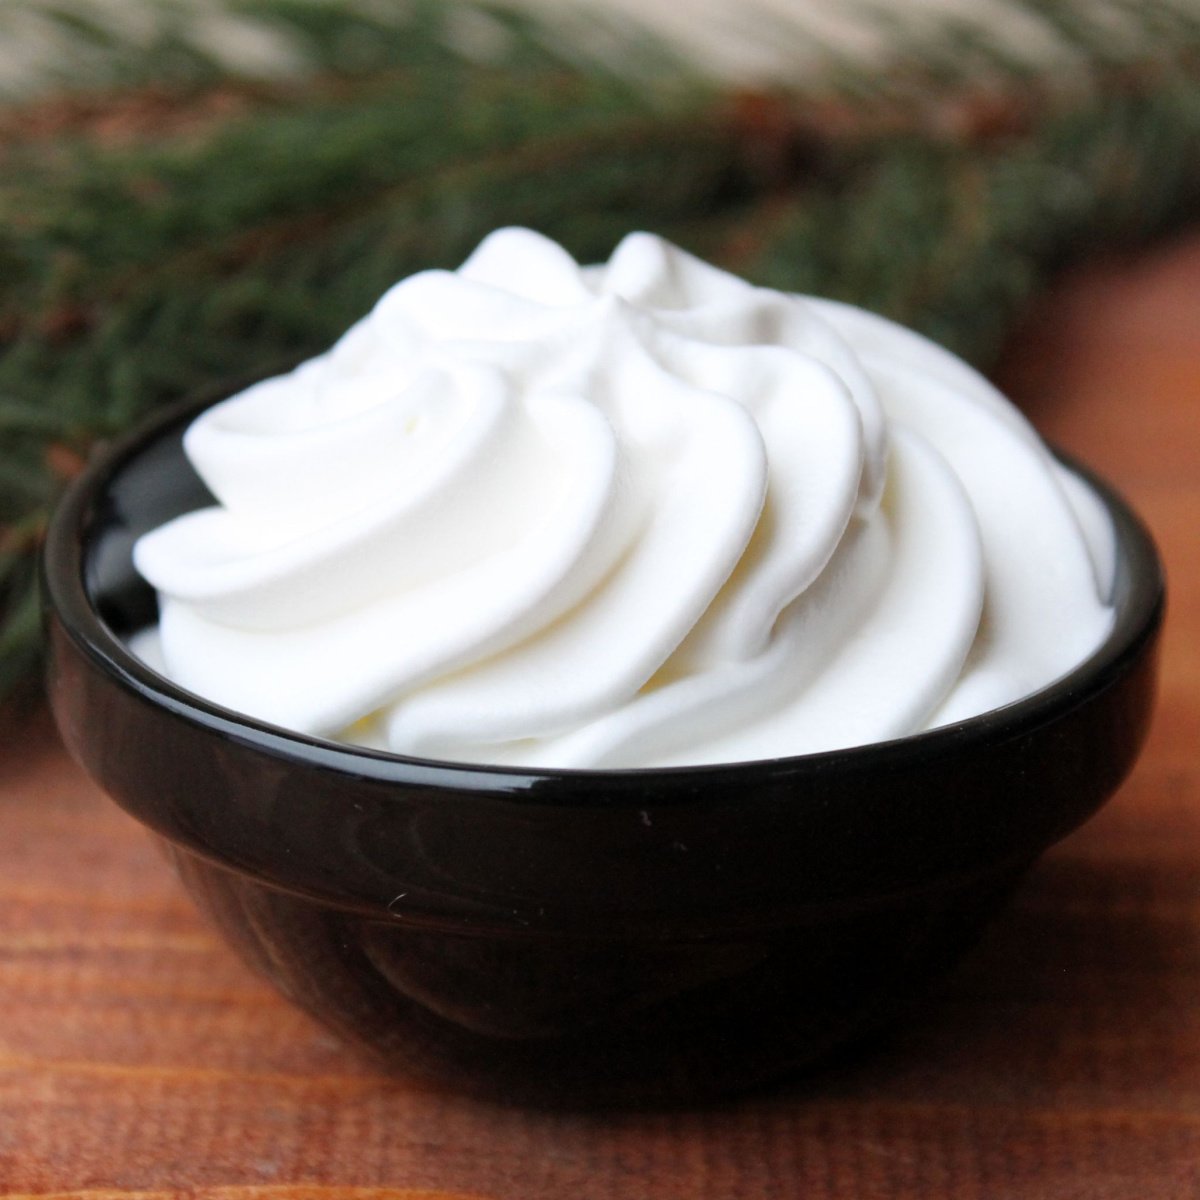 whipped cream in small black bowl on wooden table